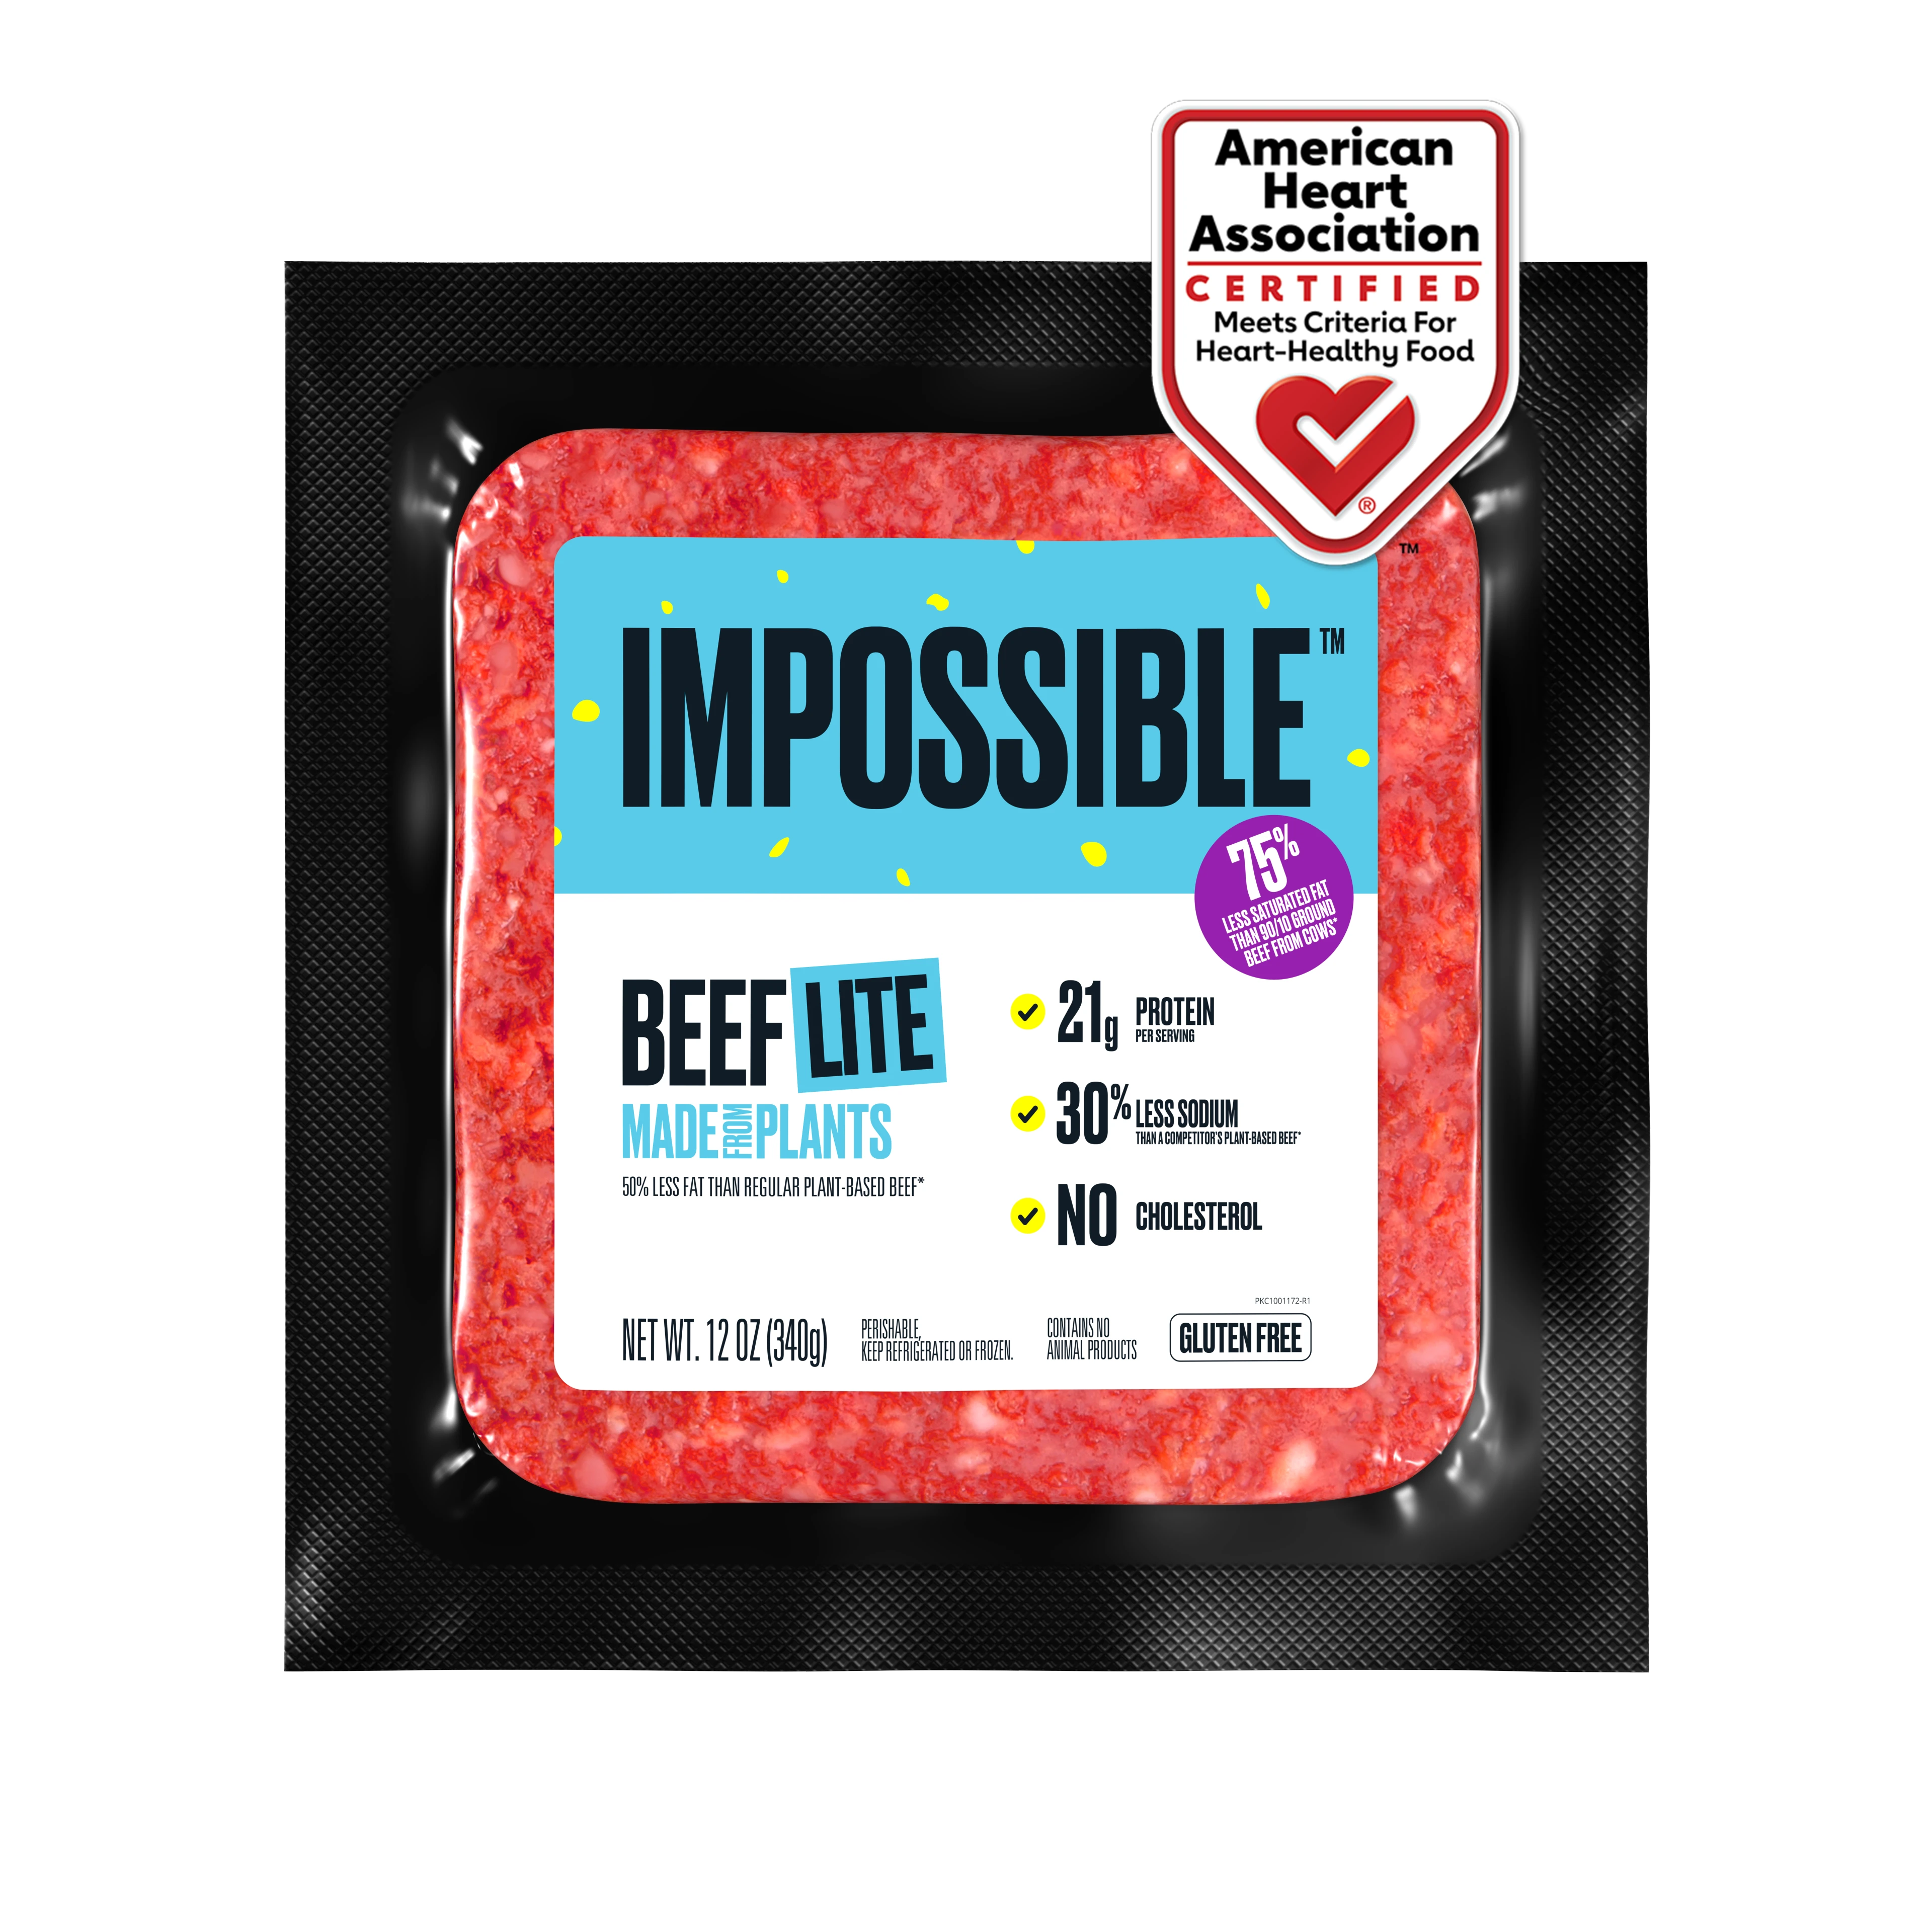 Grocery package of 16oz Impossible Beef Lite made from plants